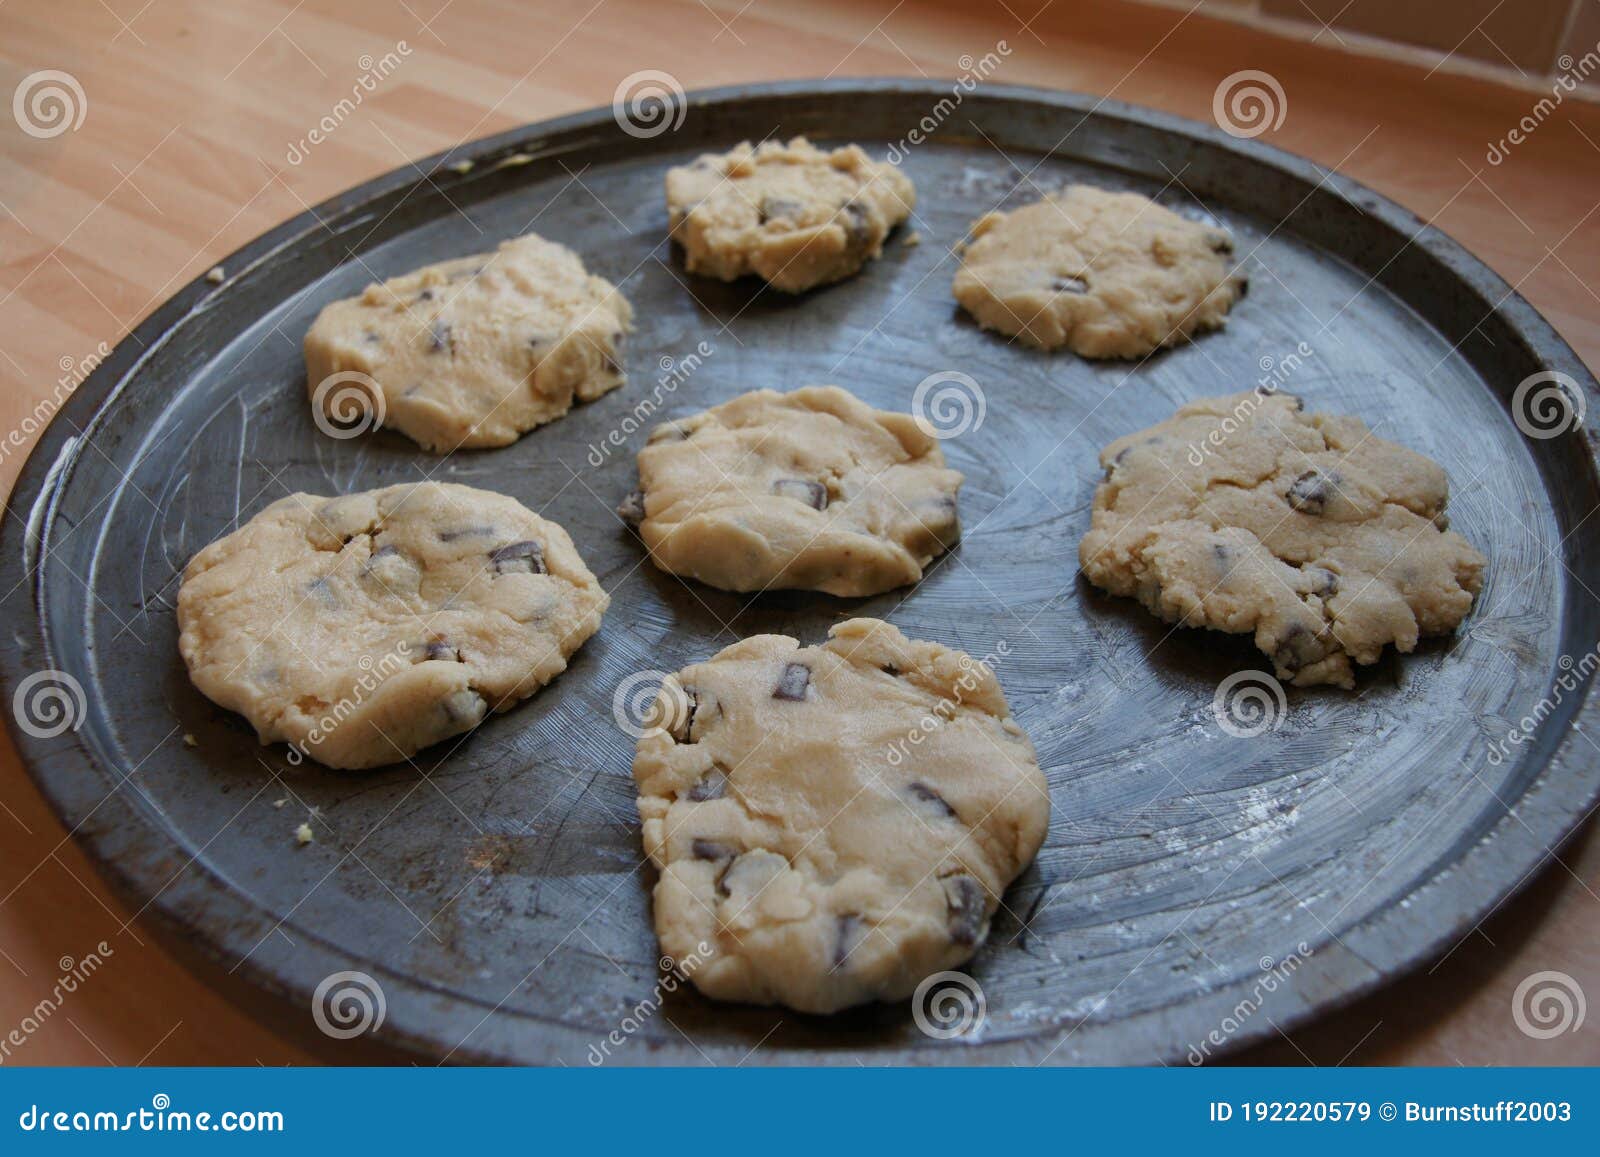 Homemade Biscuit Recipes With Self Rising Flour Mix Stock Image Image Of Fresh Sweet 192220579